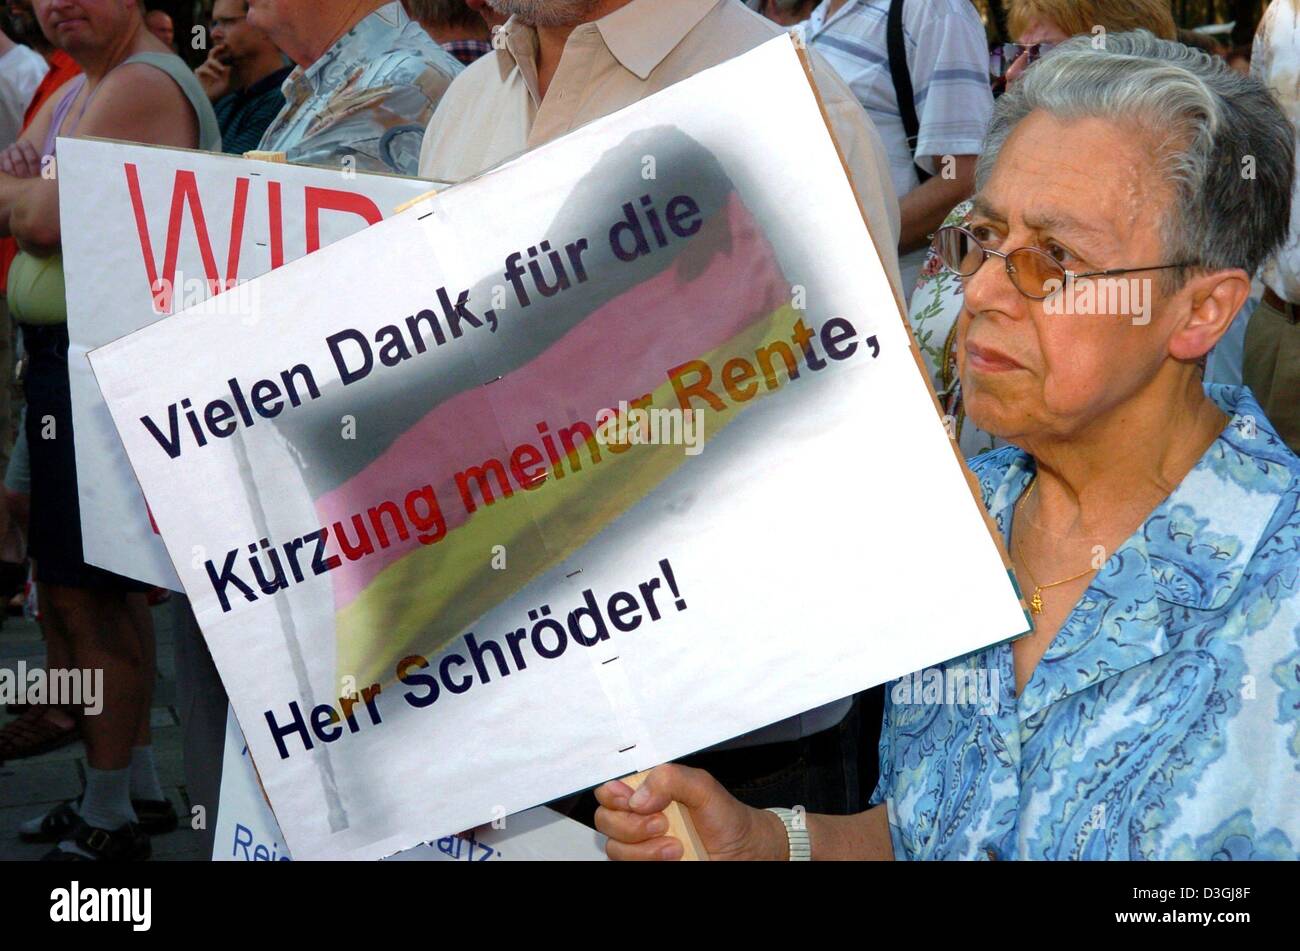 (dpa) - 'Vielen Dank, für die Kuerzung meiner Rente, Herr Schroeder!' (thank you for lowering my retirement money Mr. Schroeder) says this sign of an elderly lady during a 'Montagsdemonstration' (monday protest) against the German government's new labour laws in Jena, Germany, 9 August 2004. Several simultaneous rallies in various east German cities called for an abolition of the r Stock Photo